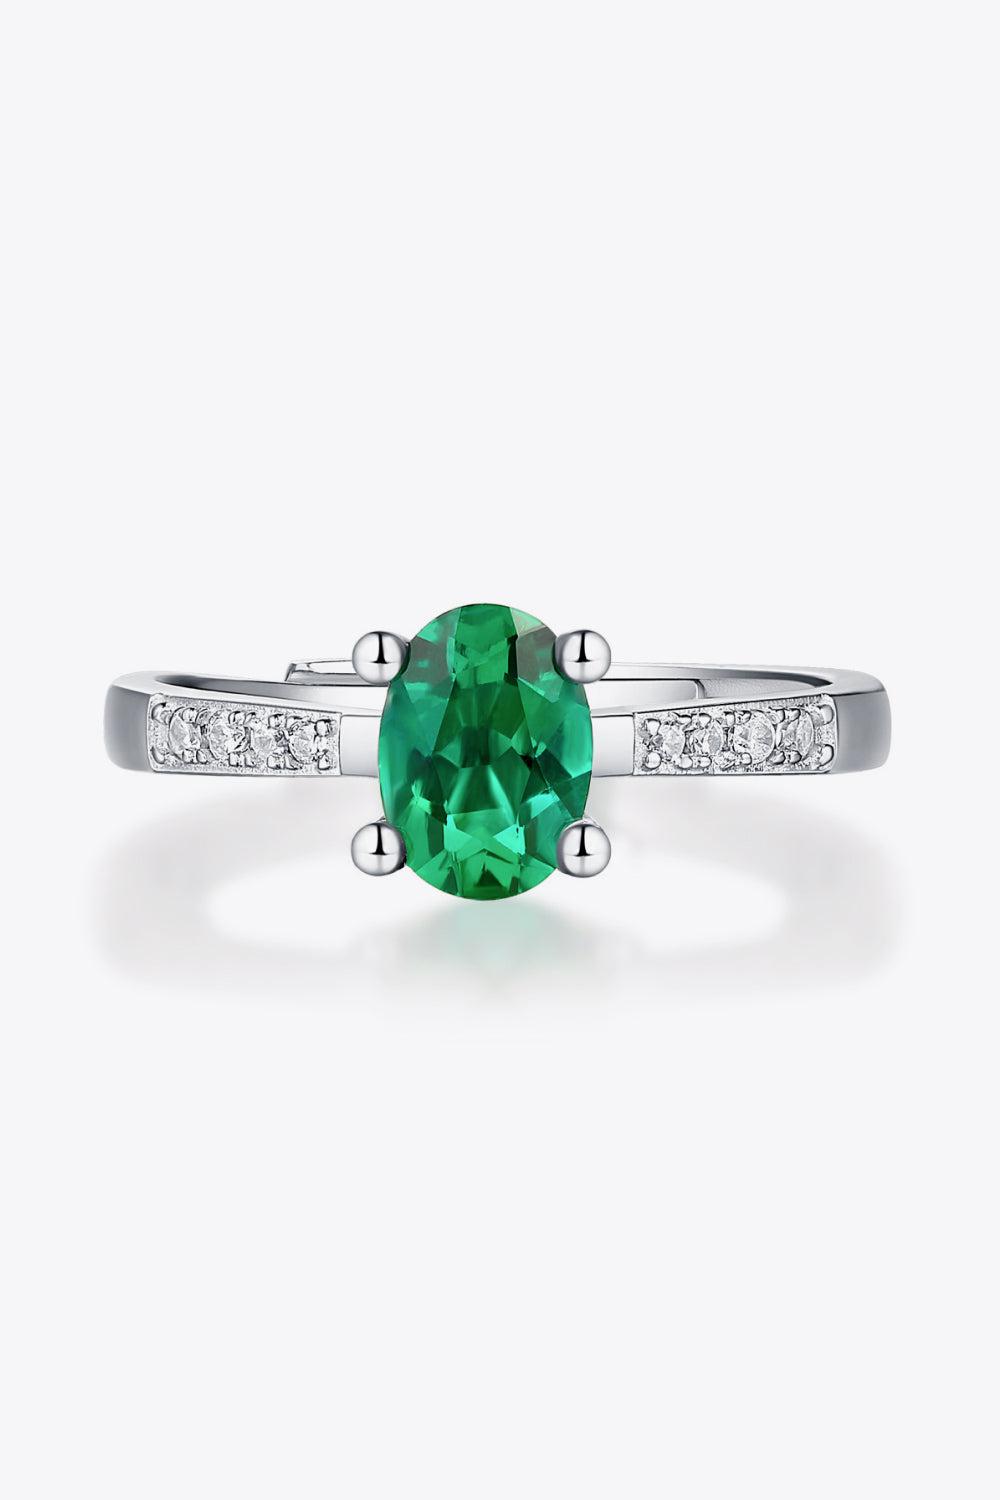 1 Carat Lab-Grown Emerald Side Stone Ring BLUE ZONE PLANET